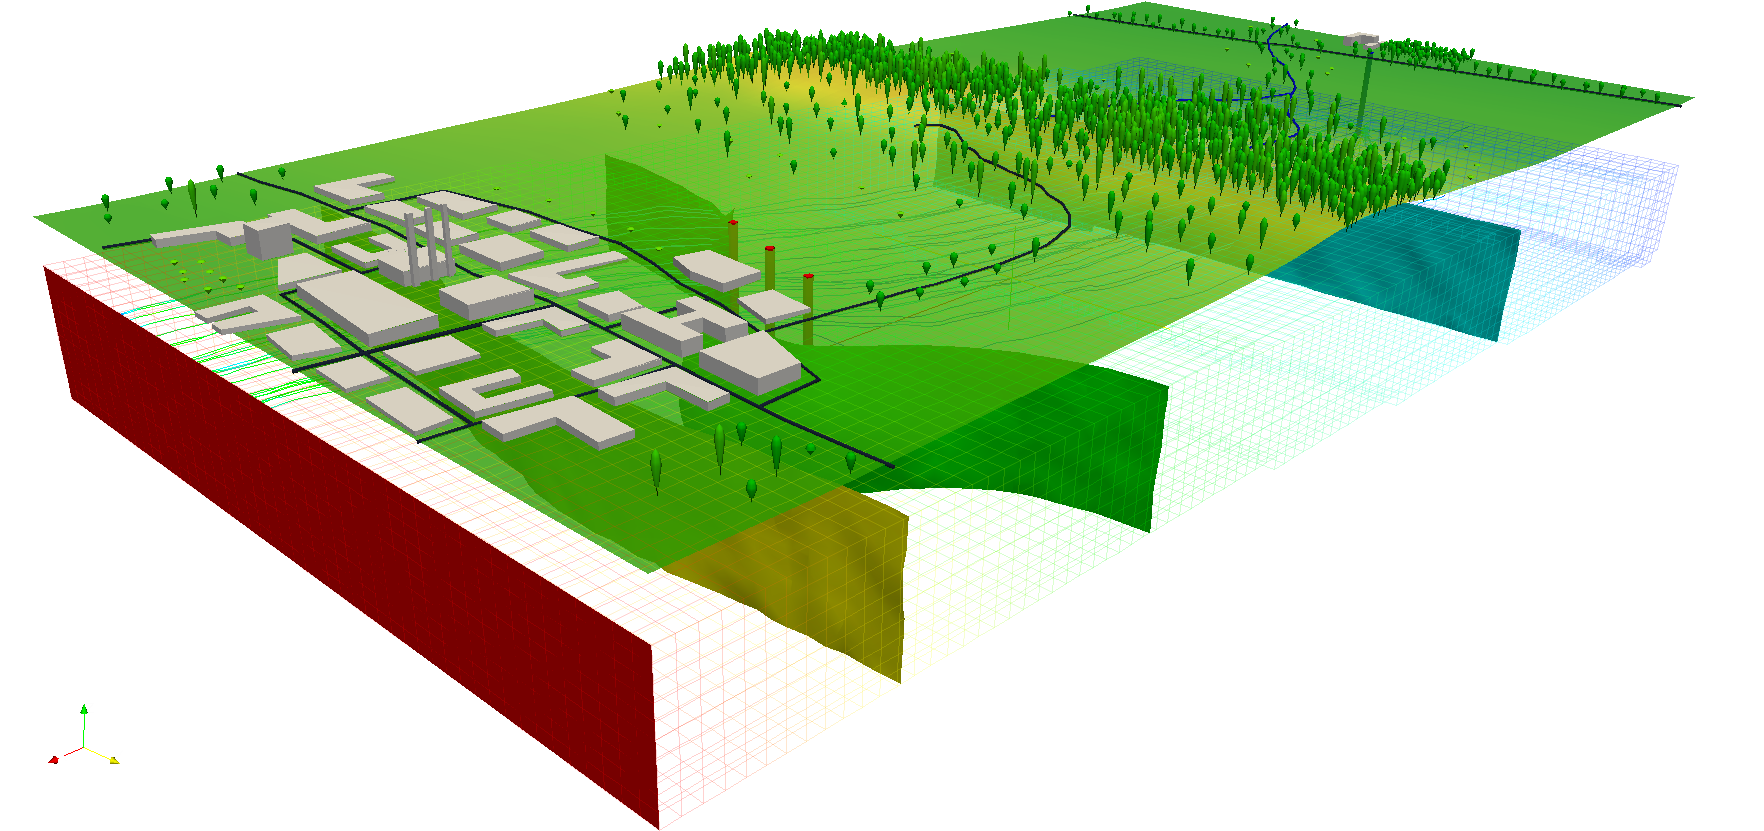 File:LausanneDemoDataset3dParaview 10.png